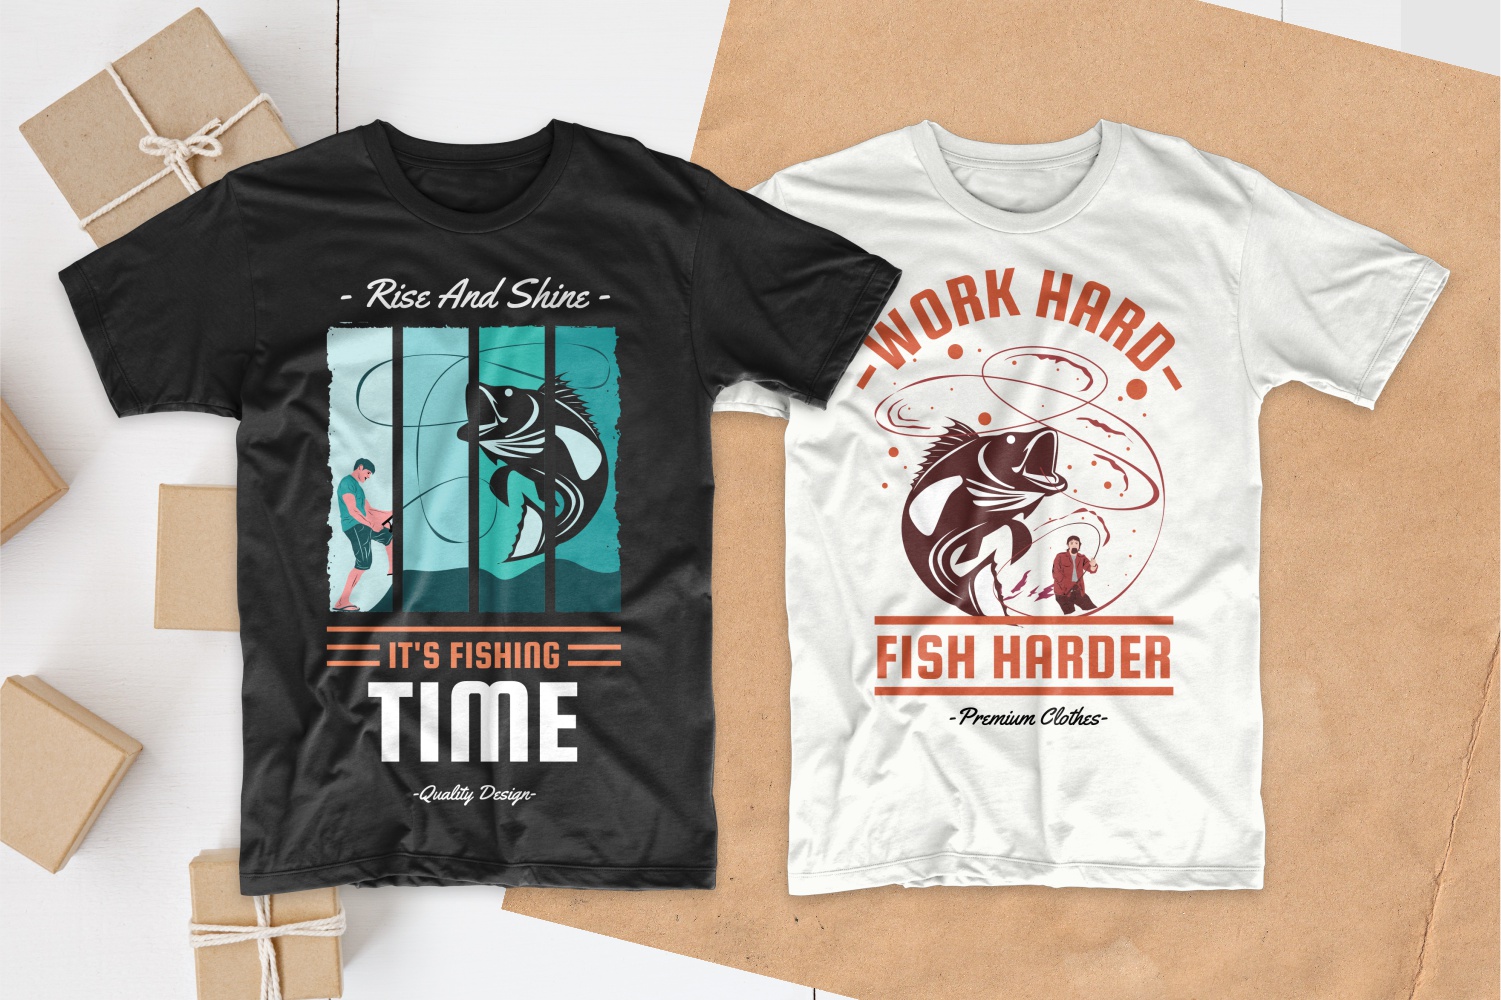 Black and white T-shirts depicting fishermen who have caught a huge fish.